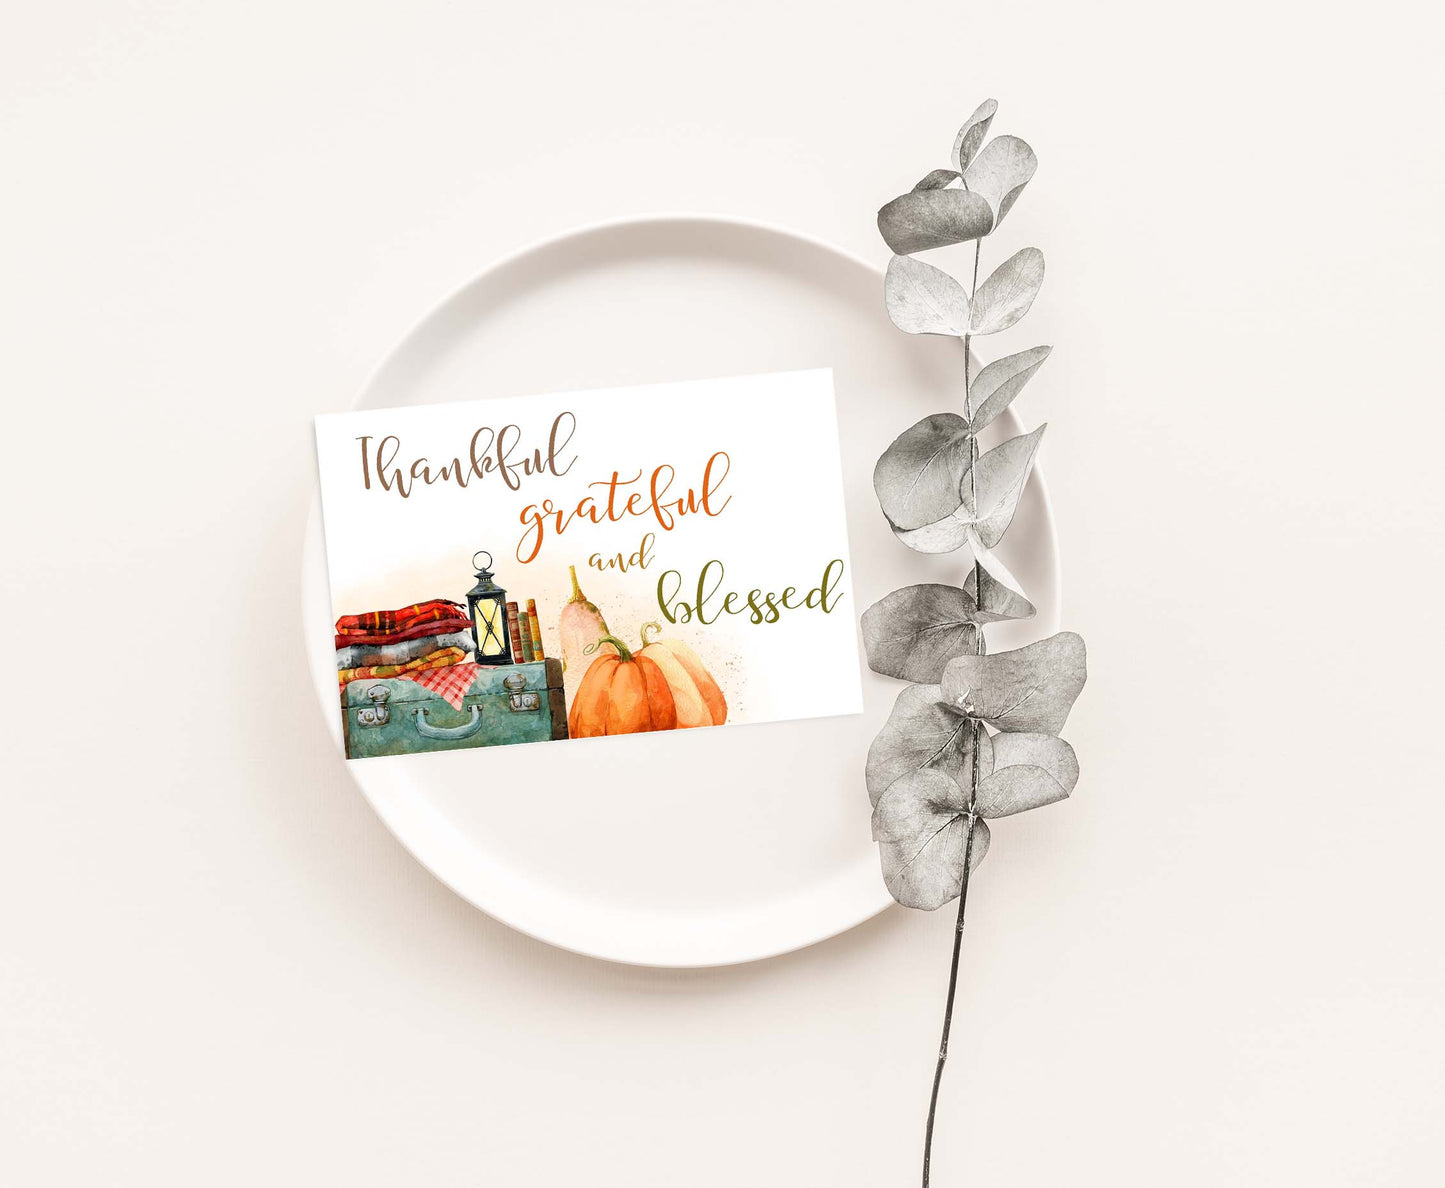 Autumn Thank You Card |  Thankful  greeting and blessed  card - 30